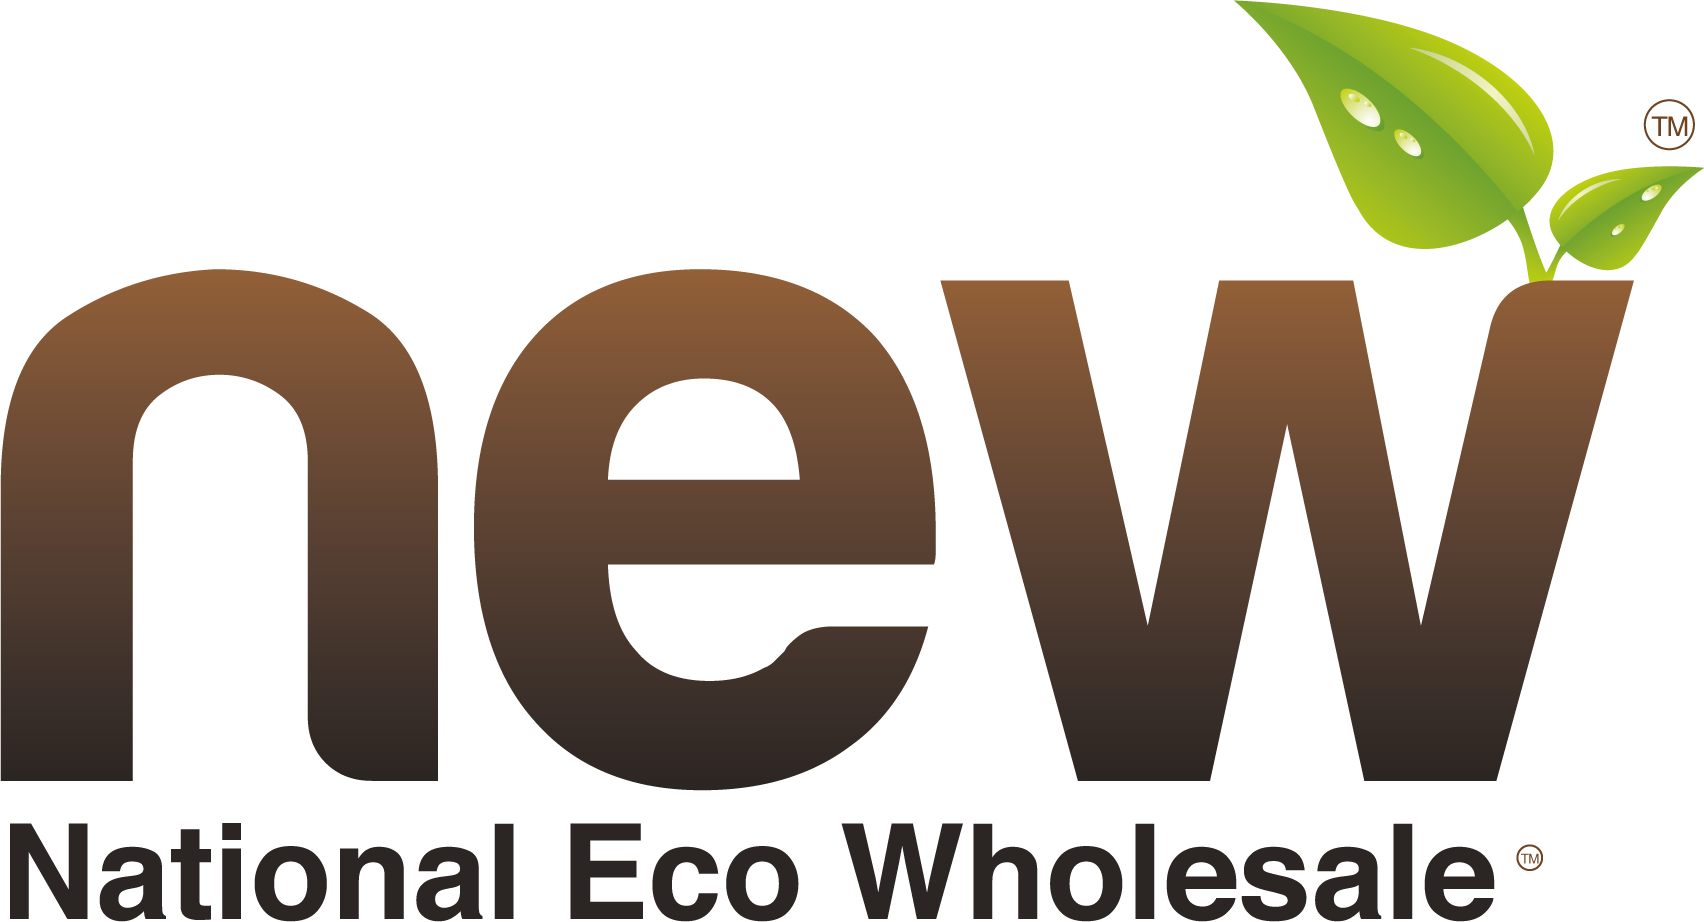 National Eco Wholesale Achieves Certified B Corporation Status Image.